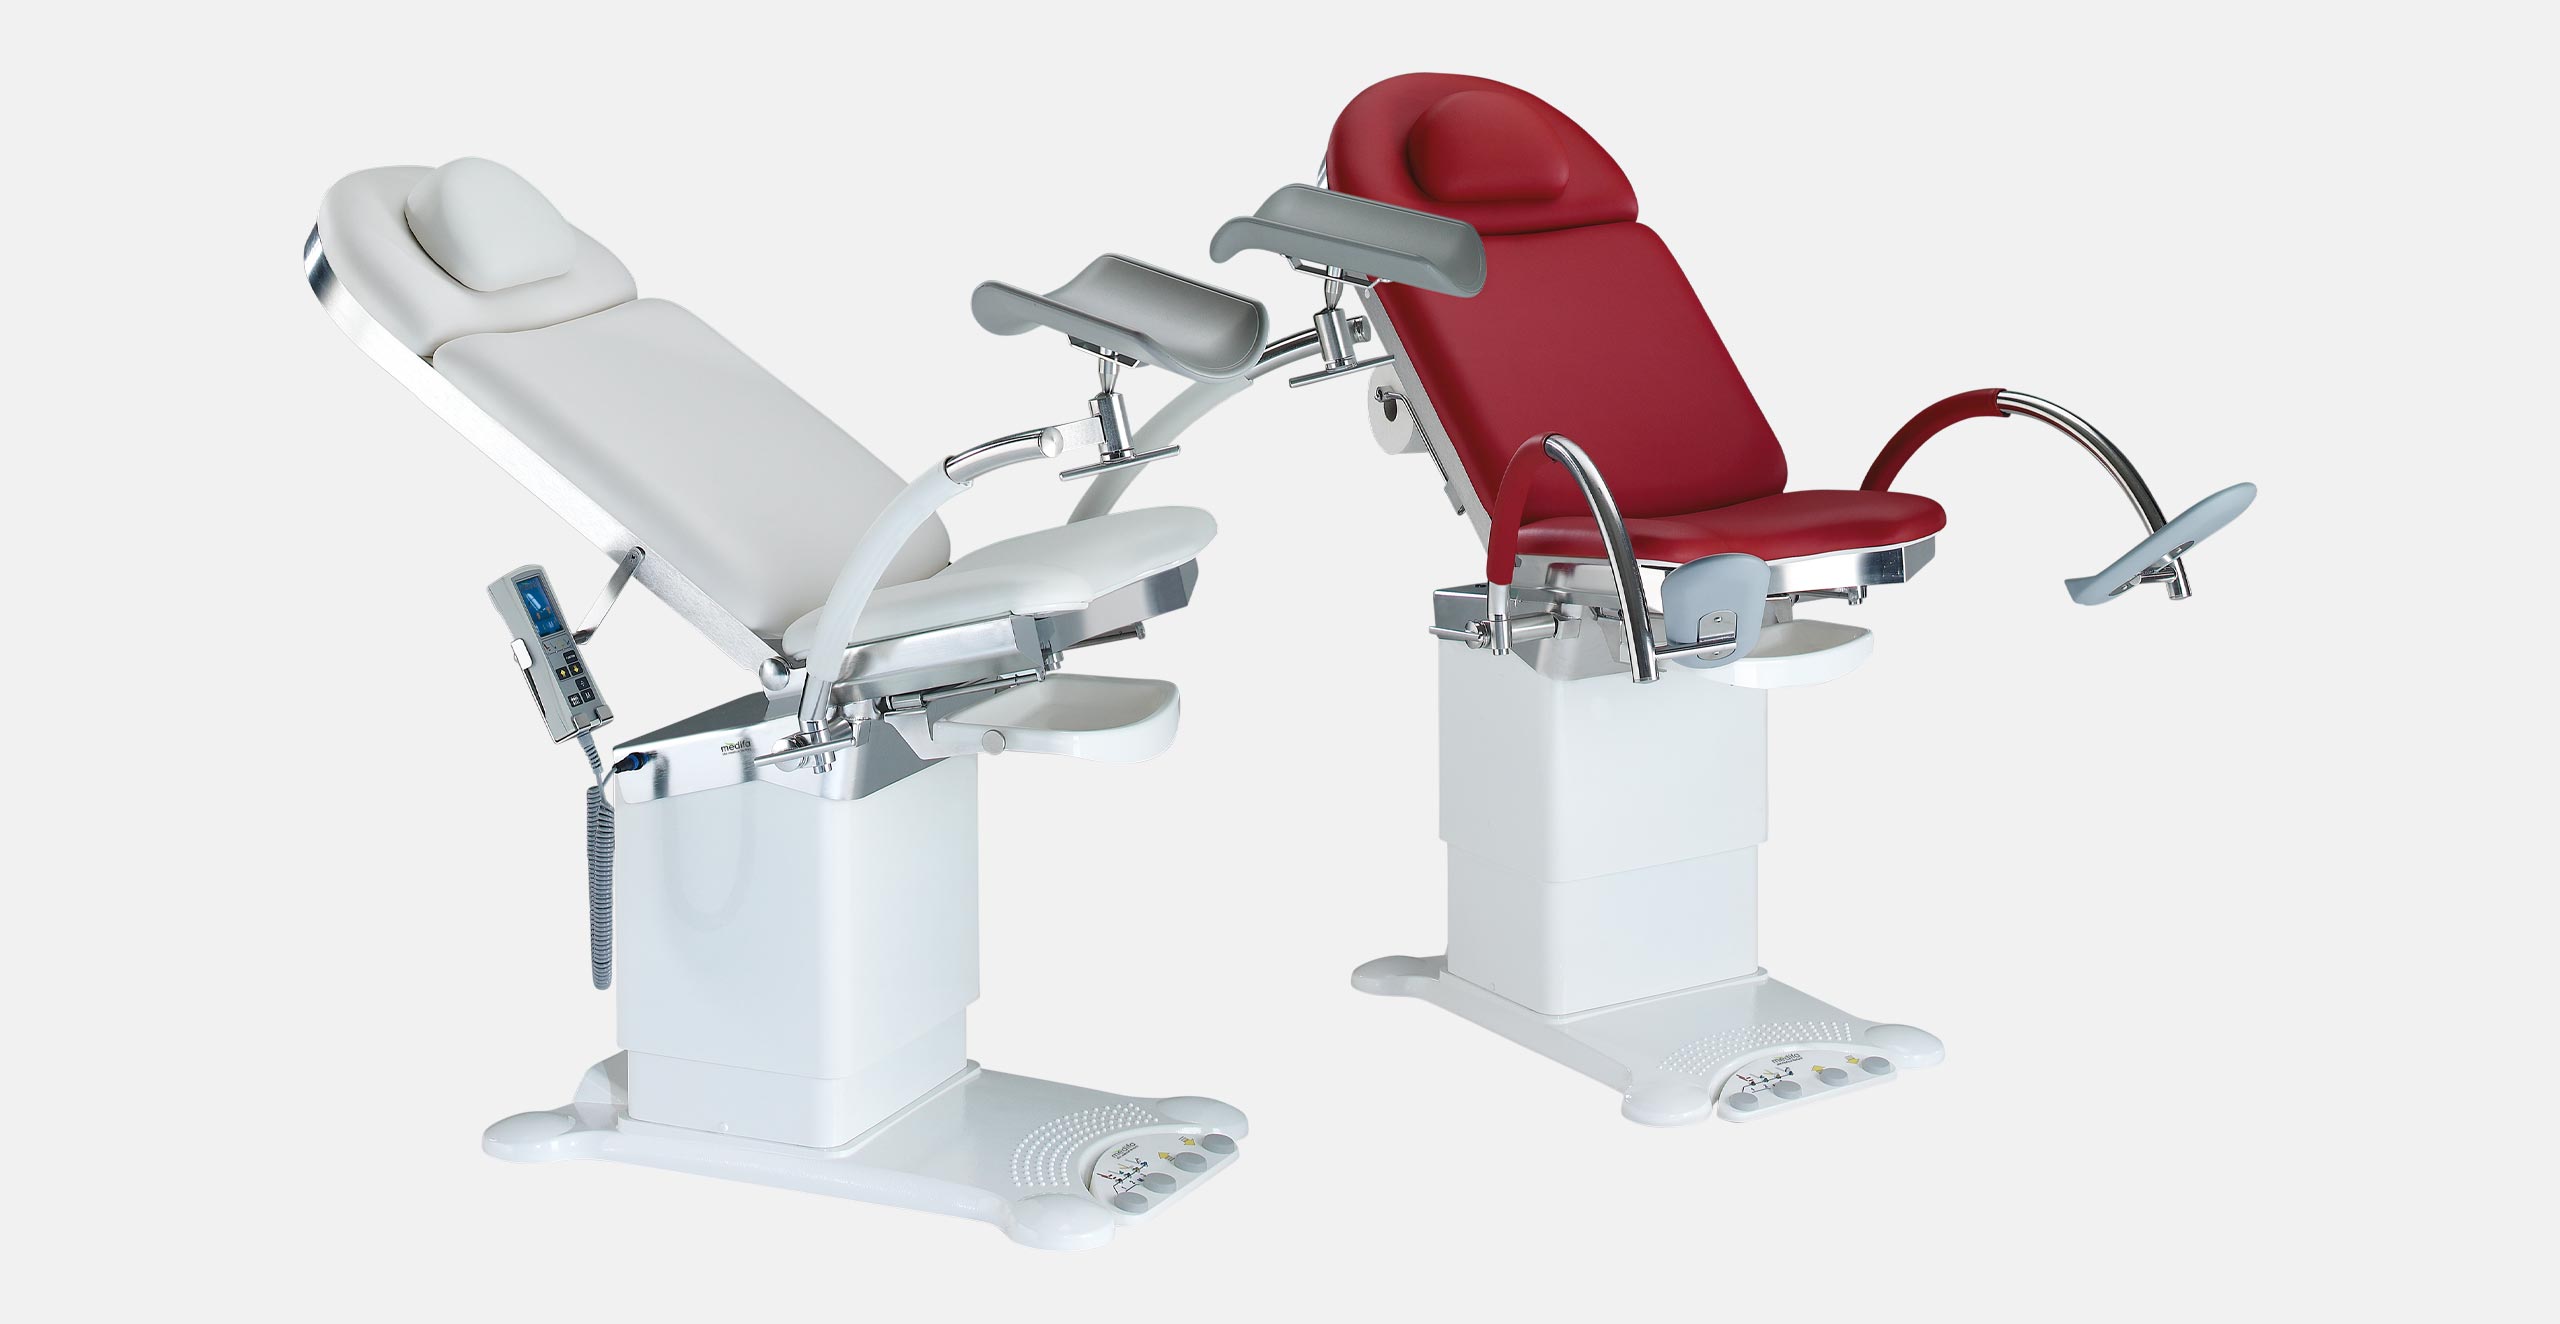 medifa_4000_examination_chairs_for_gynaecology_urology_proctology